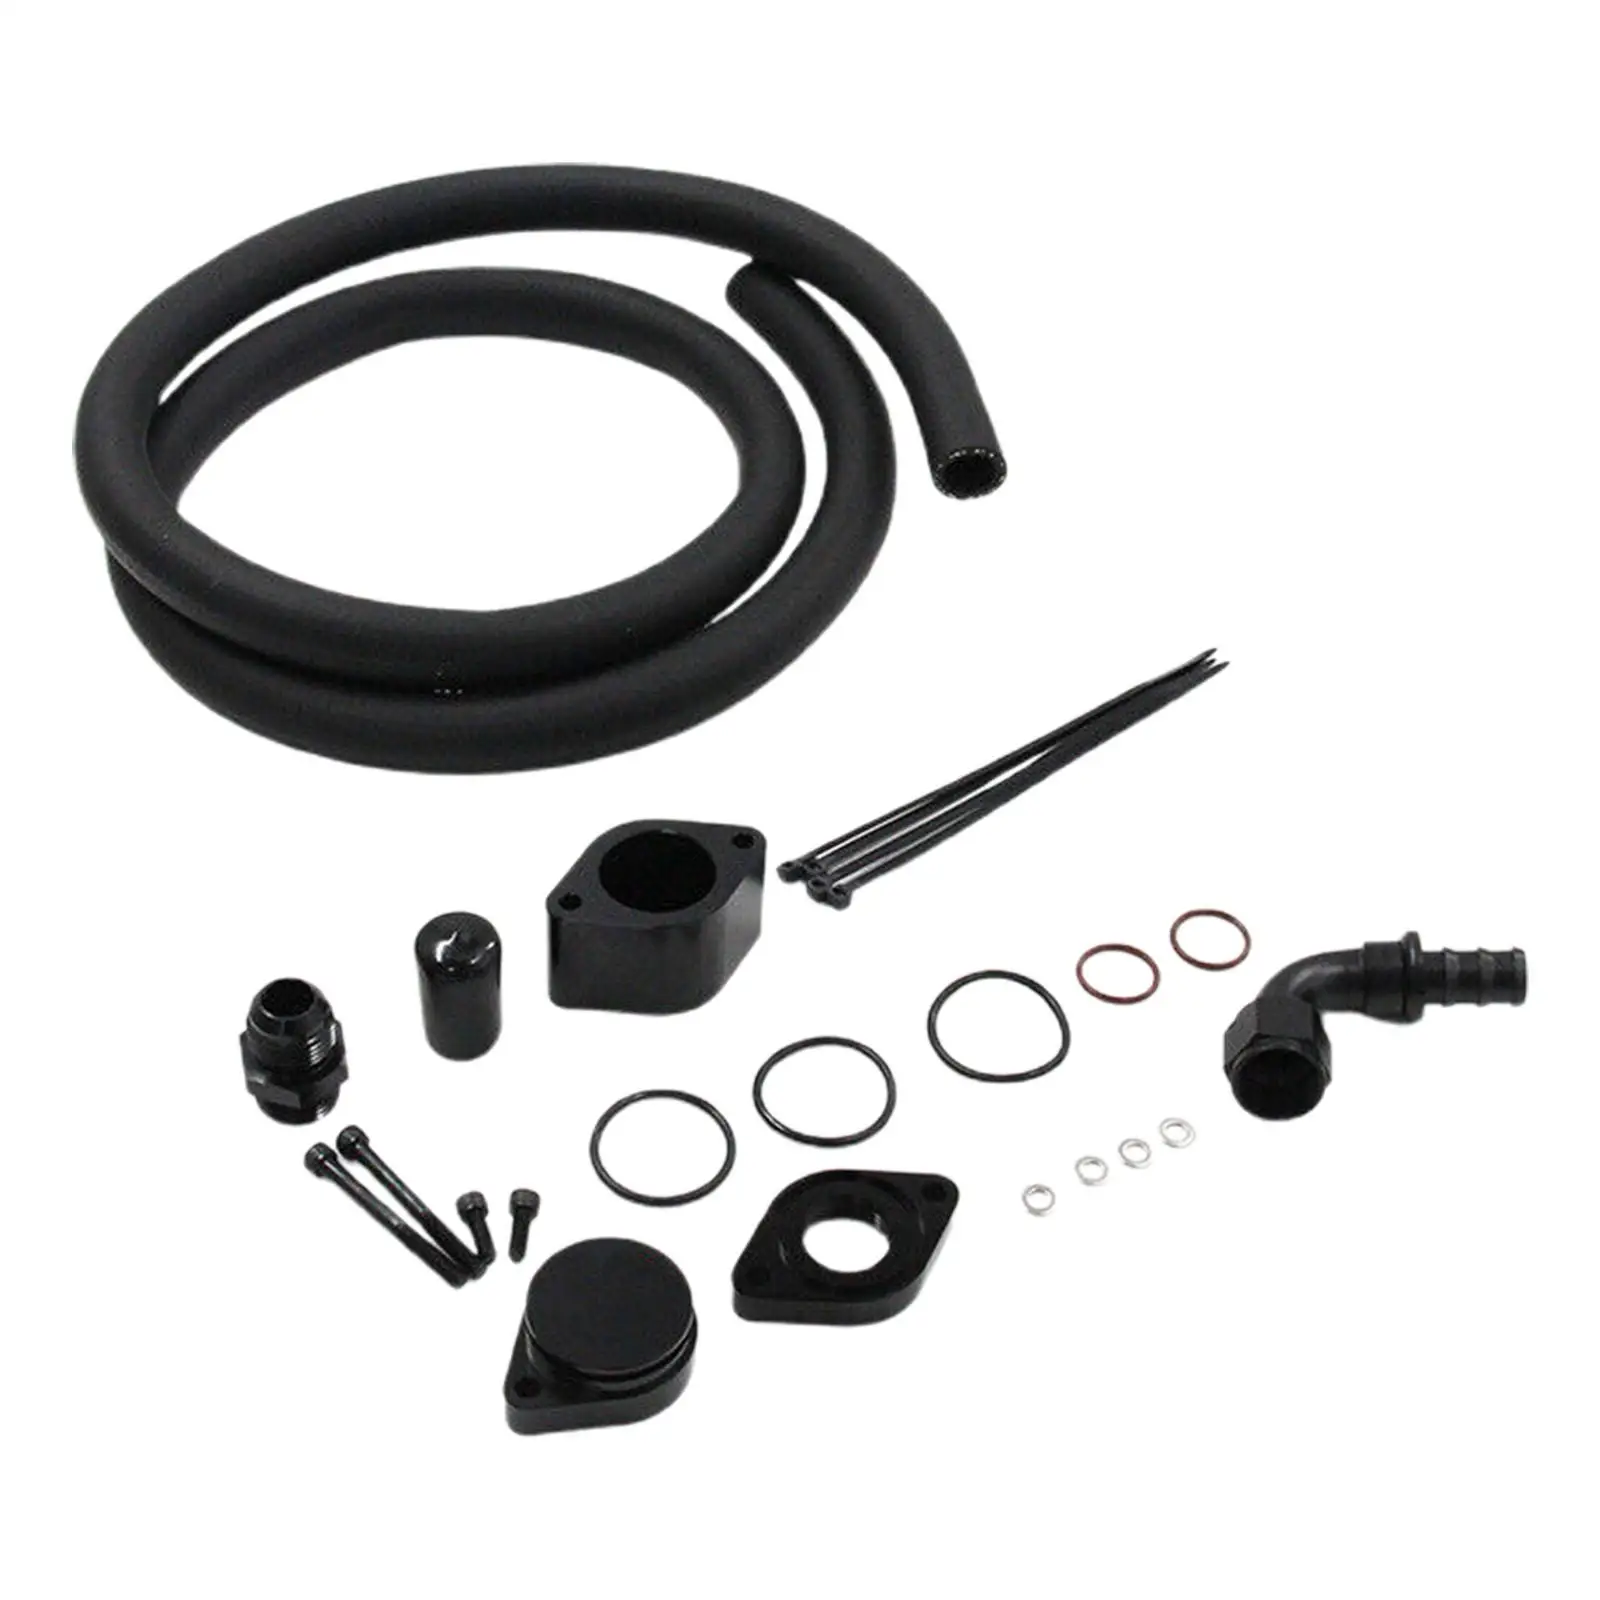 Ccv Pcv Reroute Engine Ventilation Kit Directly Replace for Ford Super Duty 11-20 6.7L Powerstroke F-350 F-450 F-250 F750